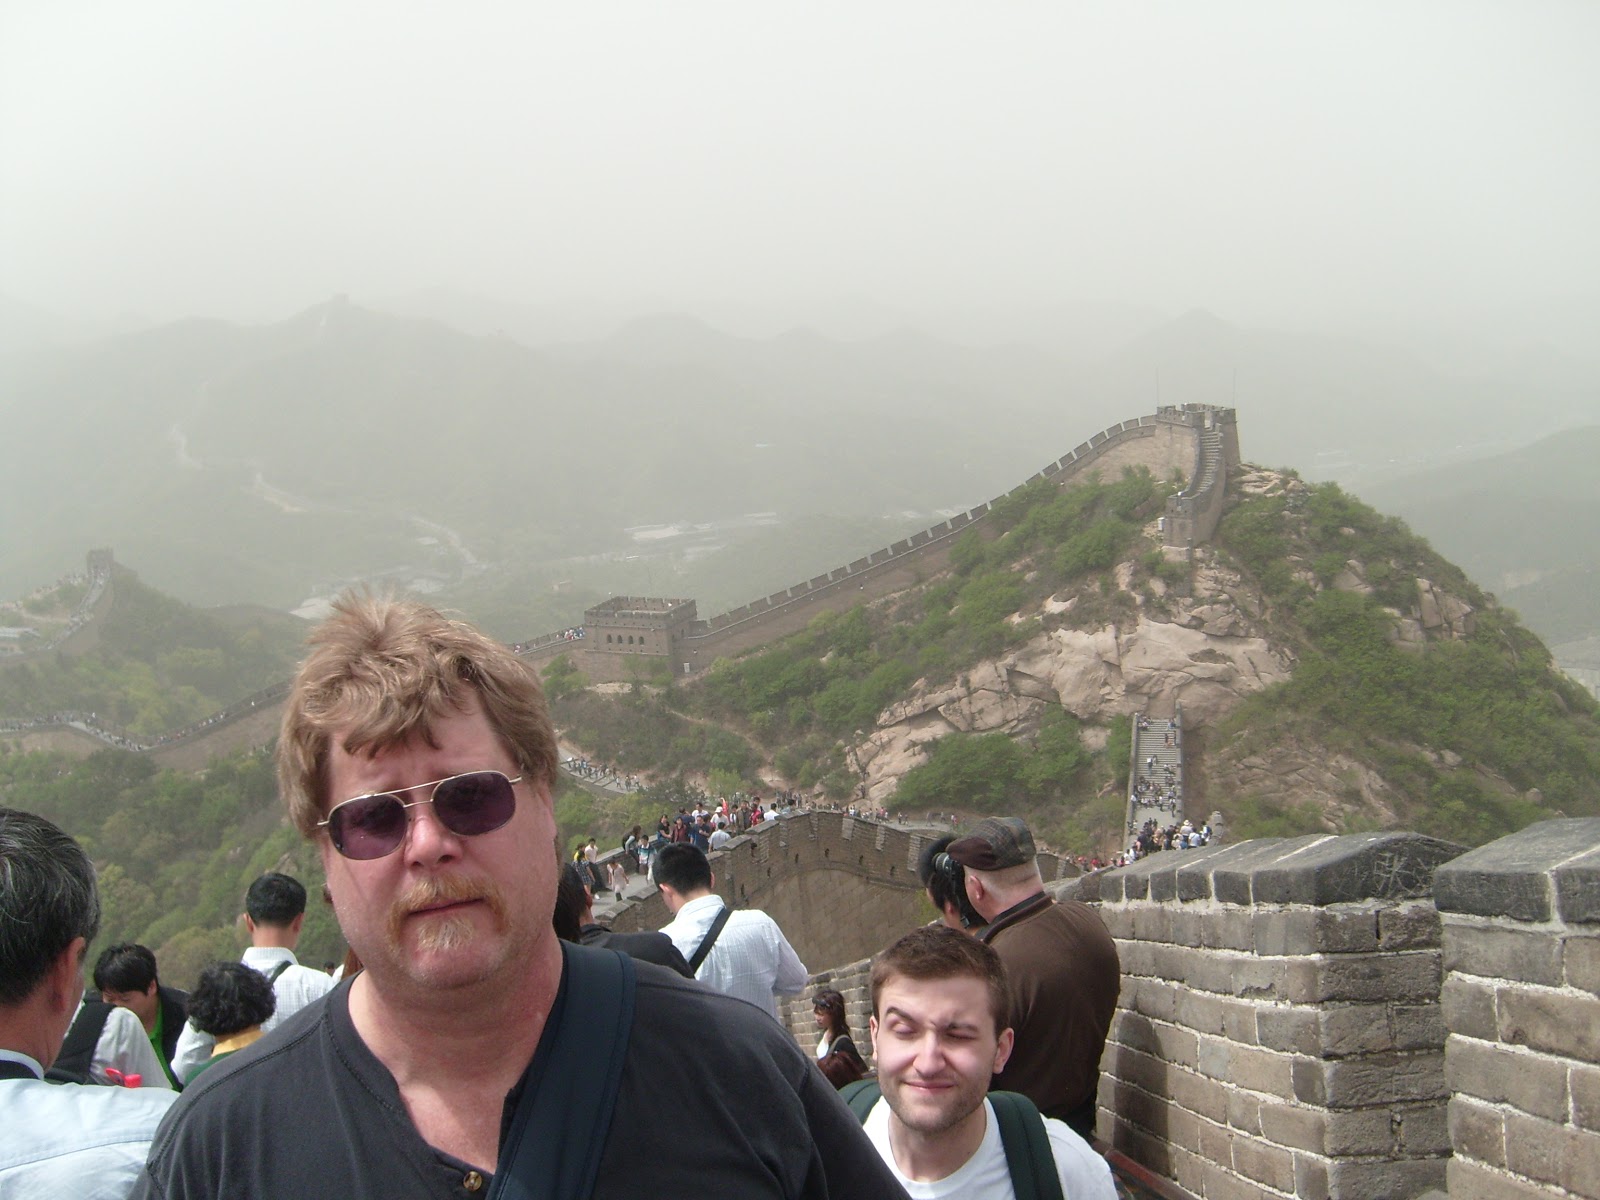 Vol State Virtual Munity Walking The Great Wall Of China For